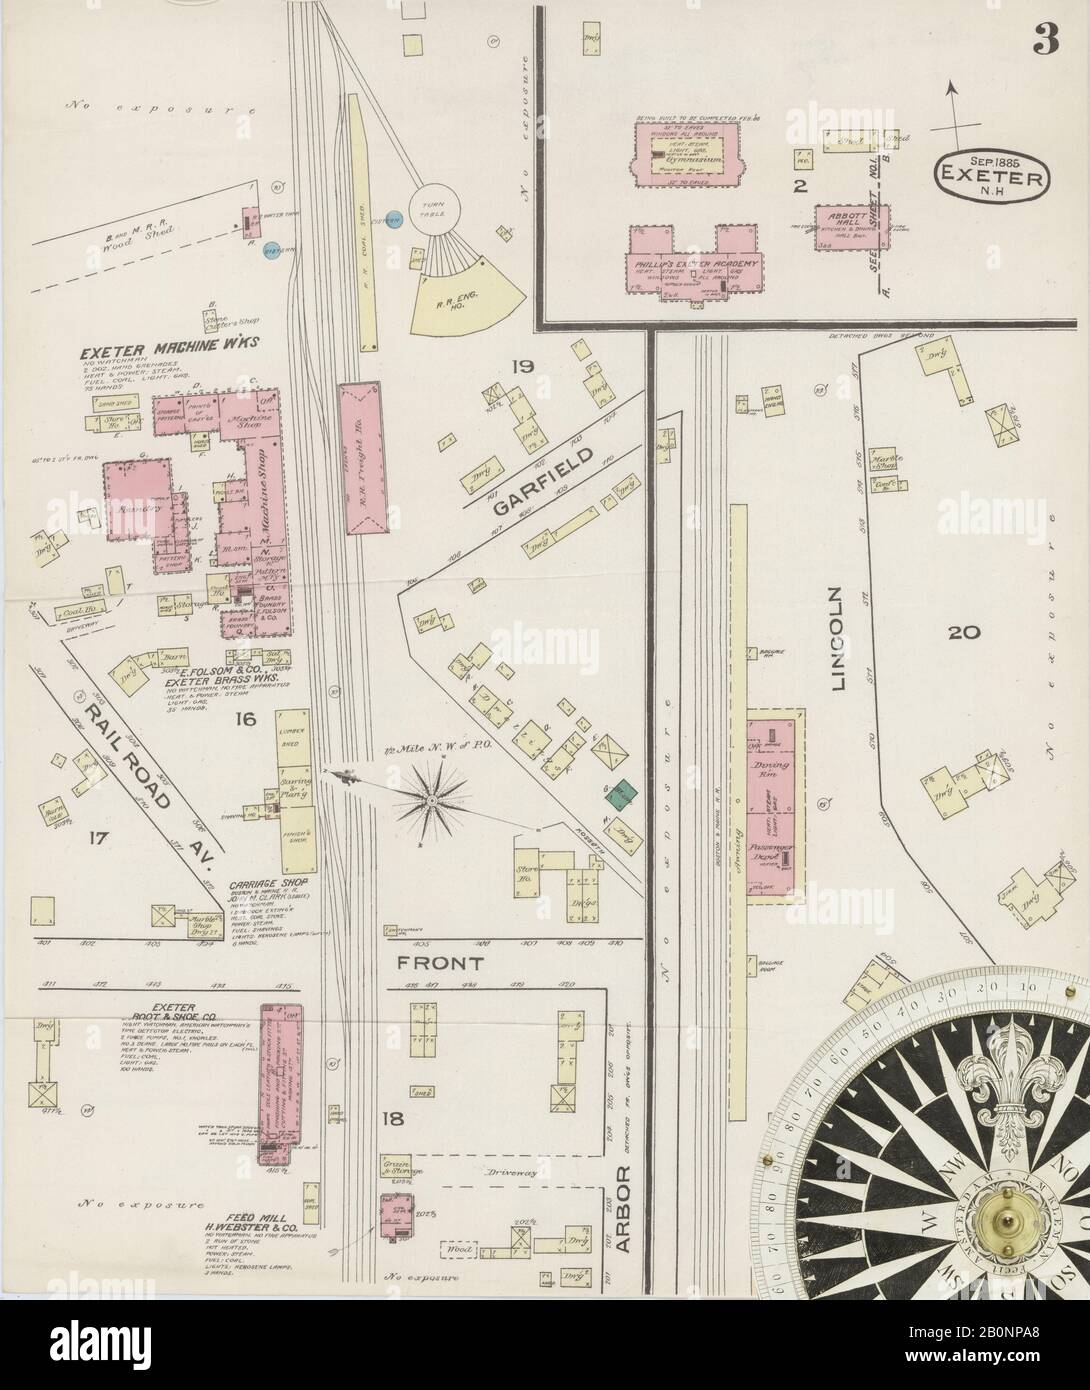 Image 3 of Sanborn Fire Insurance Map from Exeter, Rockingham County, New Hampshire. Sep 1885. 3 Sheet(s), America, street map with a Nineteenth Century compass Stock Photo